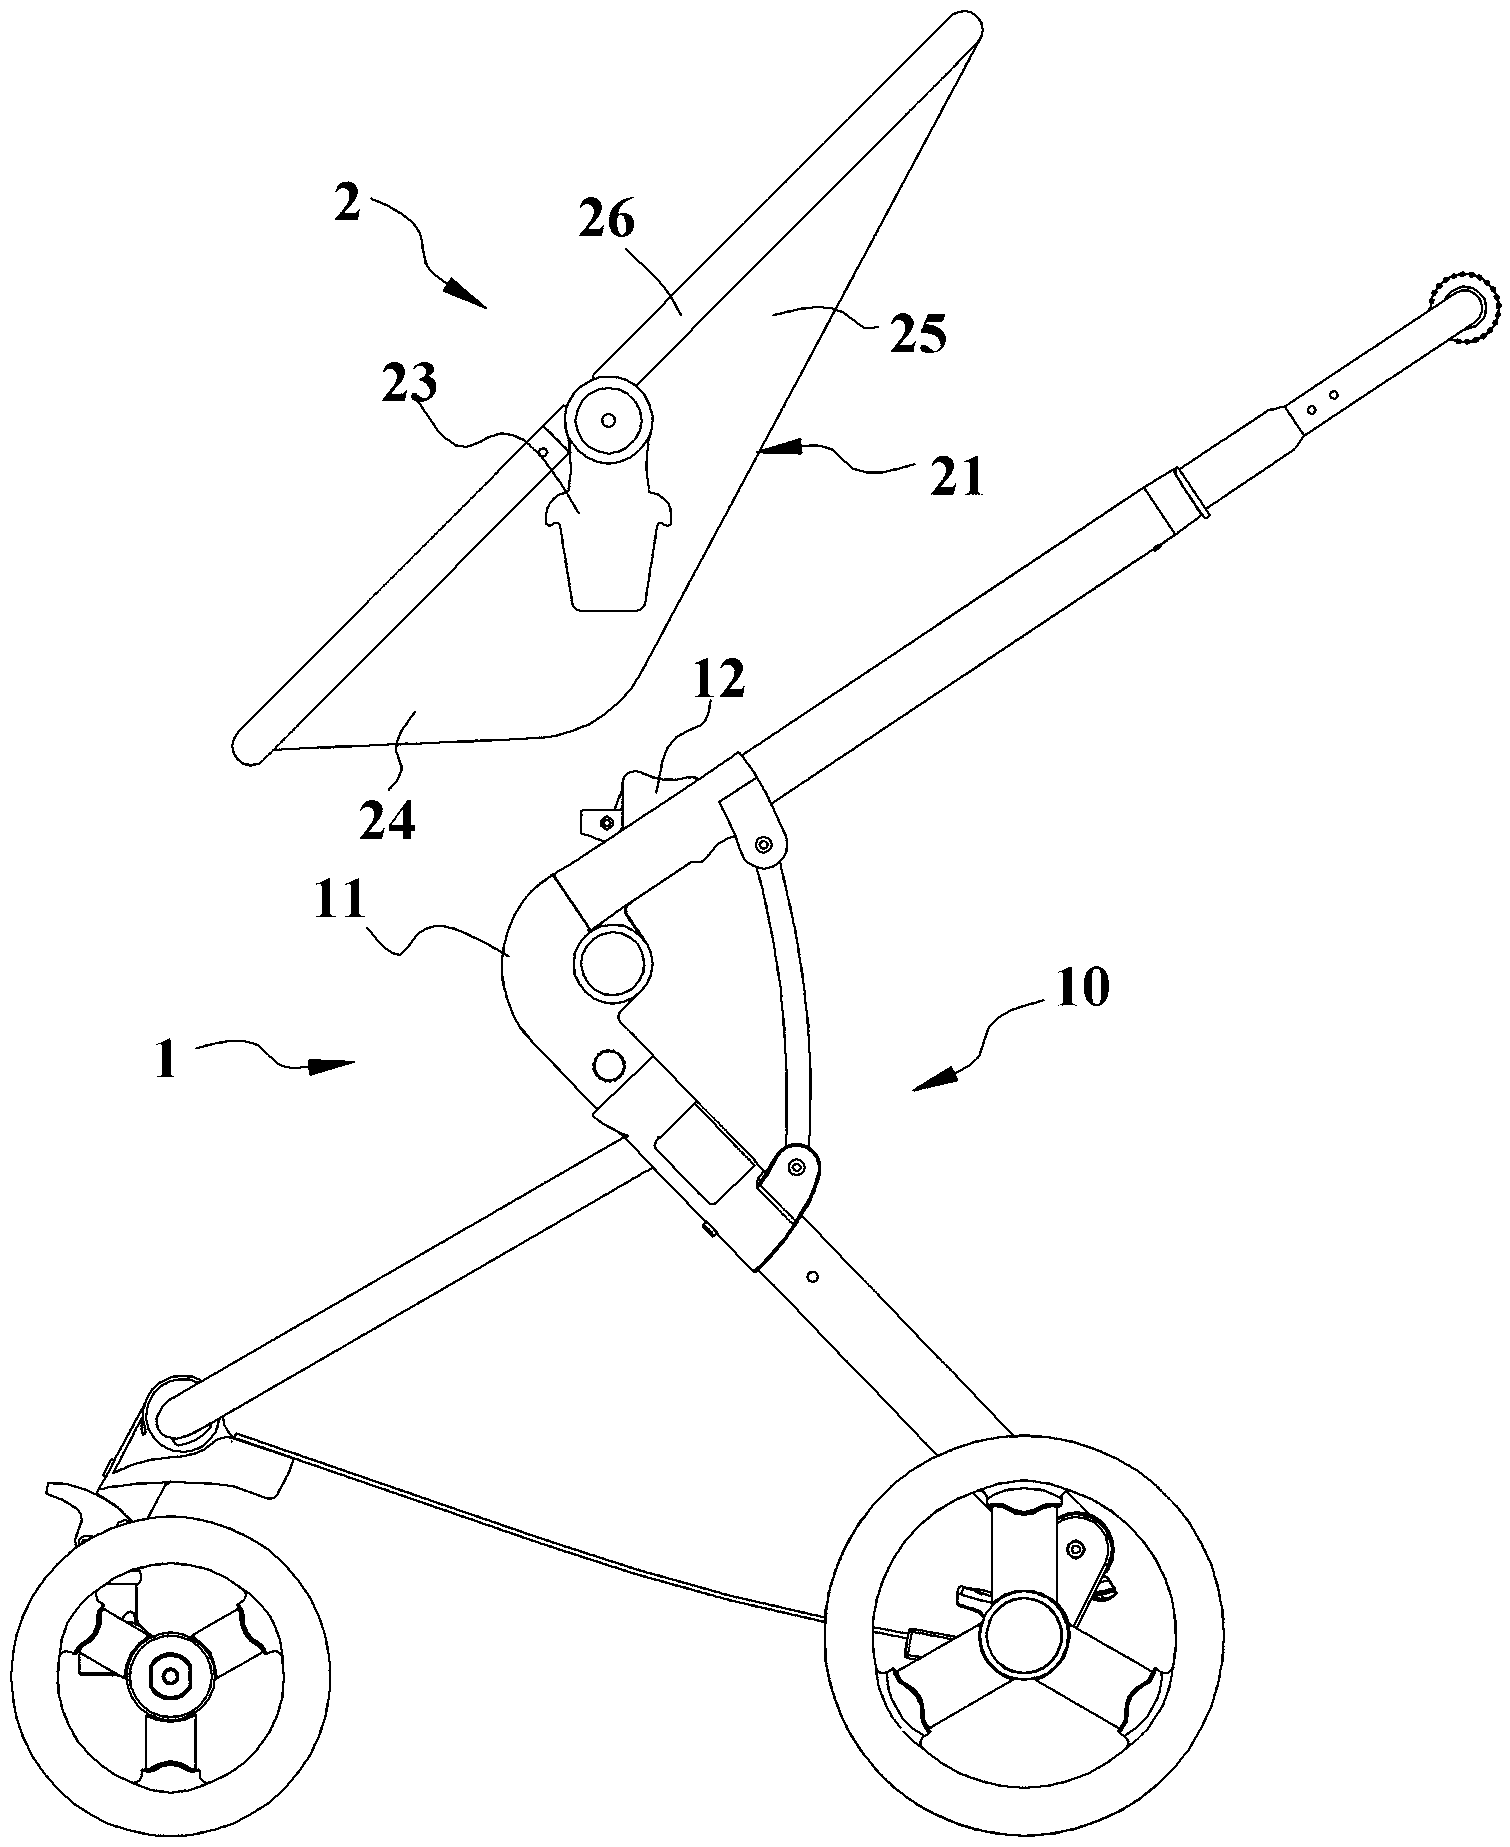 Load bearing unit of carrying tool for babies